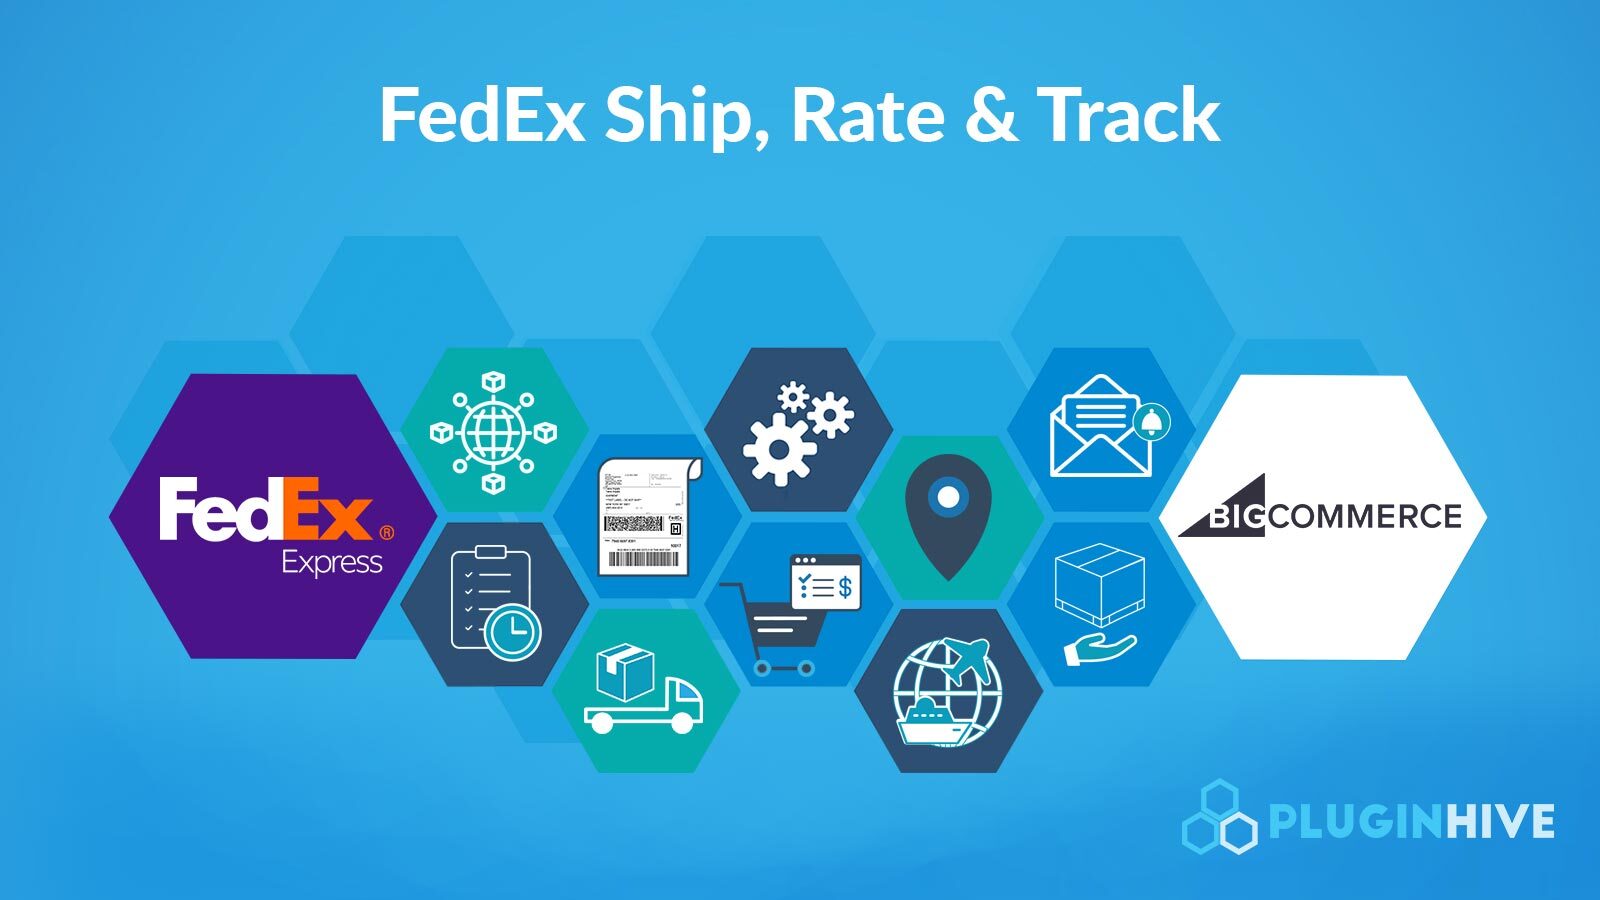 bigcommerce fedex ship rate and track